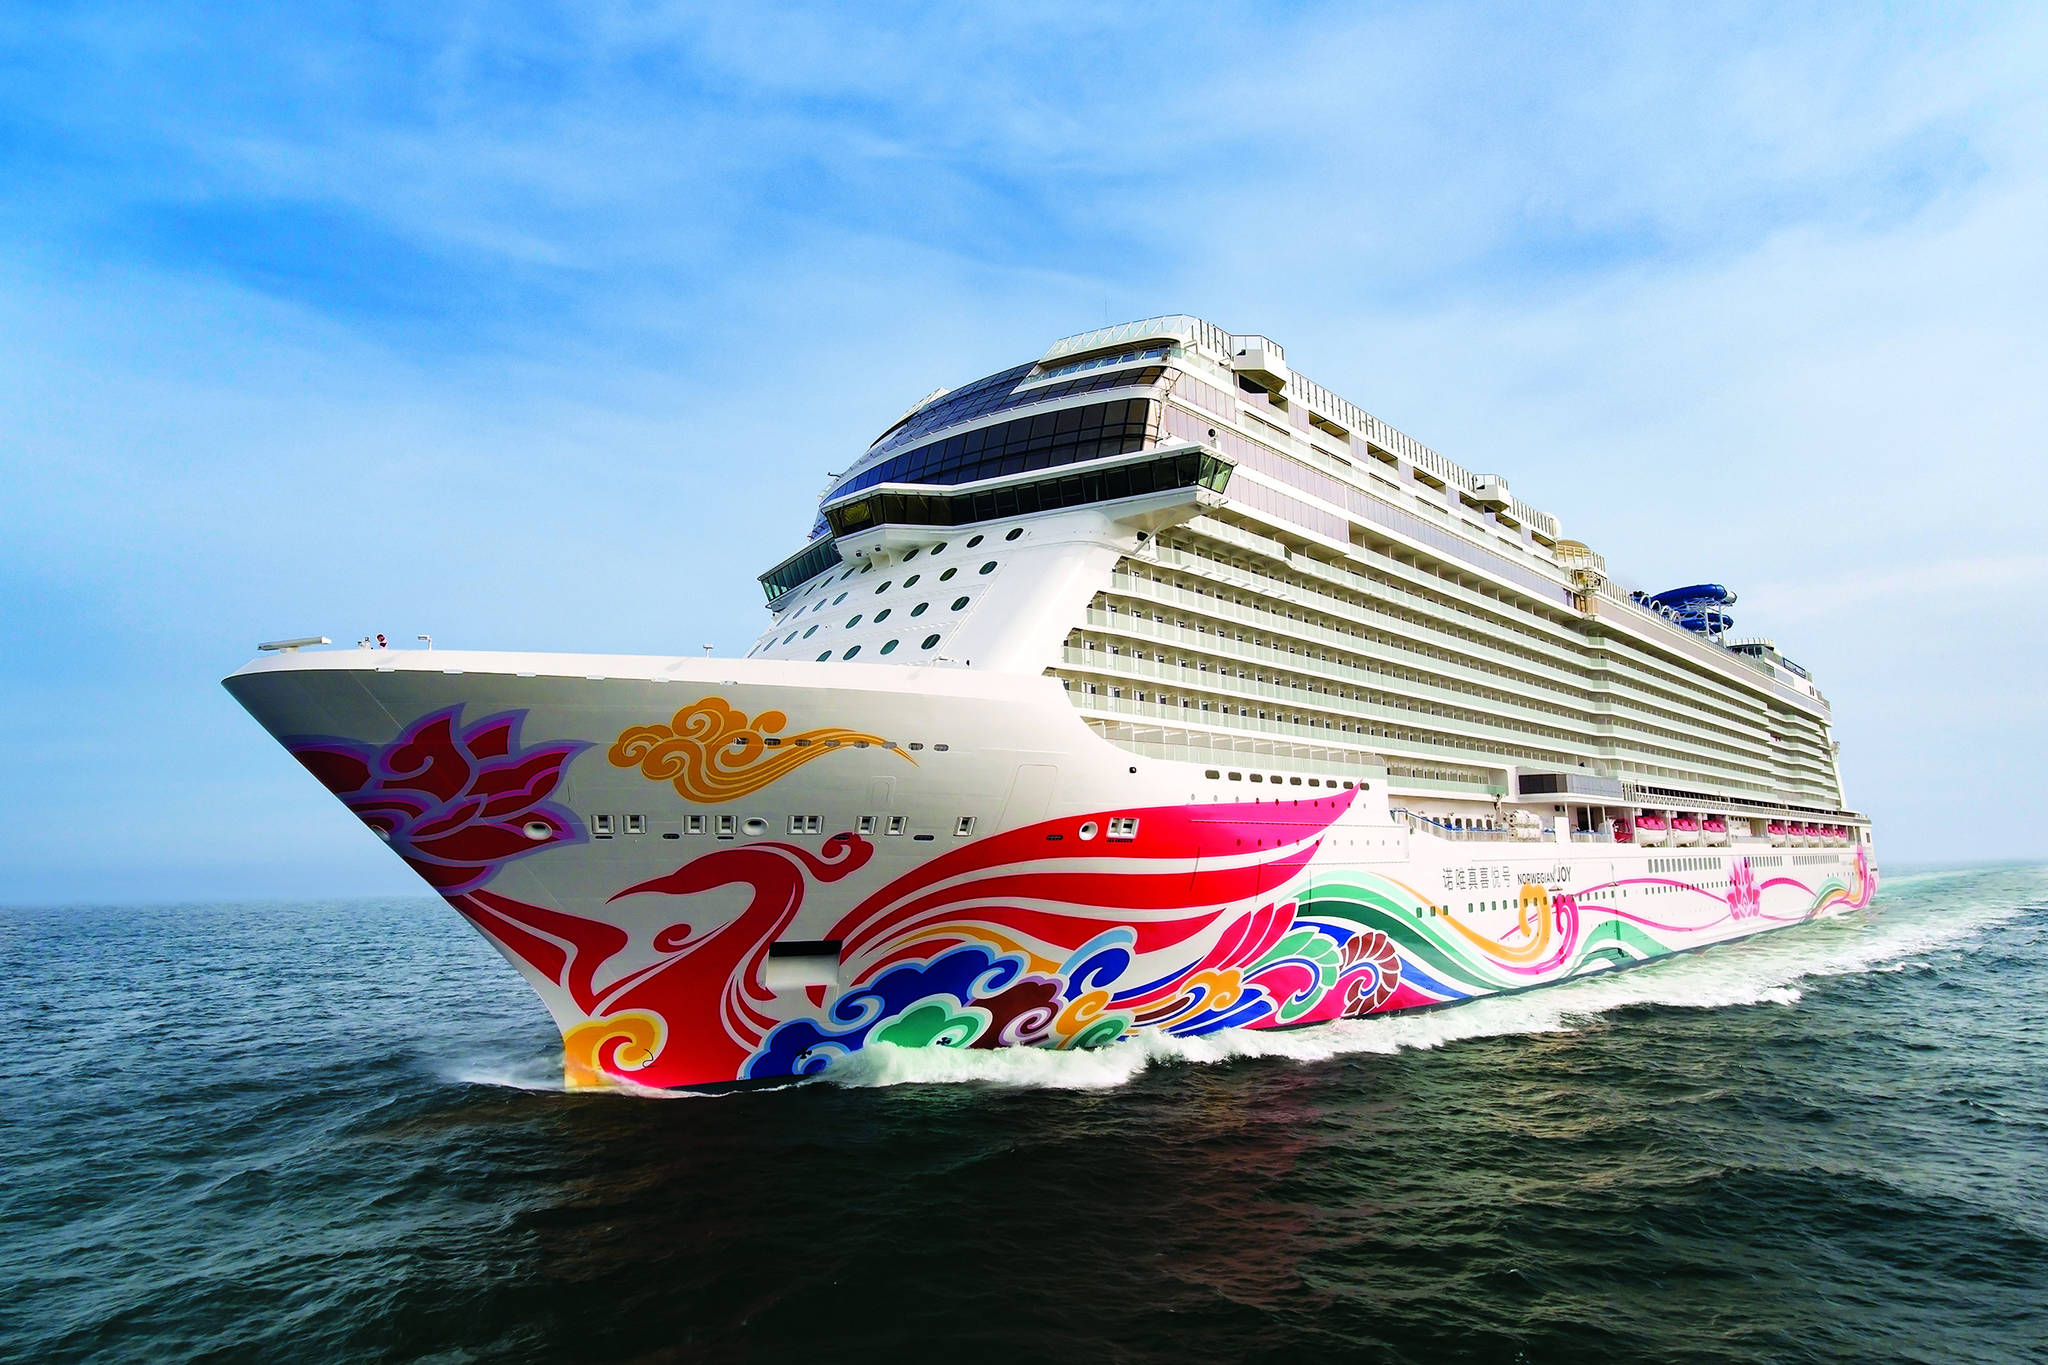 The Norwegian Joy sails during sea trial. The new pier planned for Icy Strait Point near Hoonah is a development of collaboration between Huna Totem Corporation and NCL. The pier will be able to handle ships the size of the Norwegian Joy. (Courtesy photo | Norwegian Cruise Line)